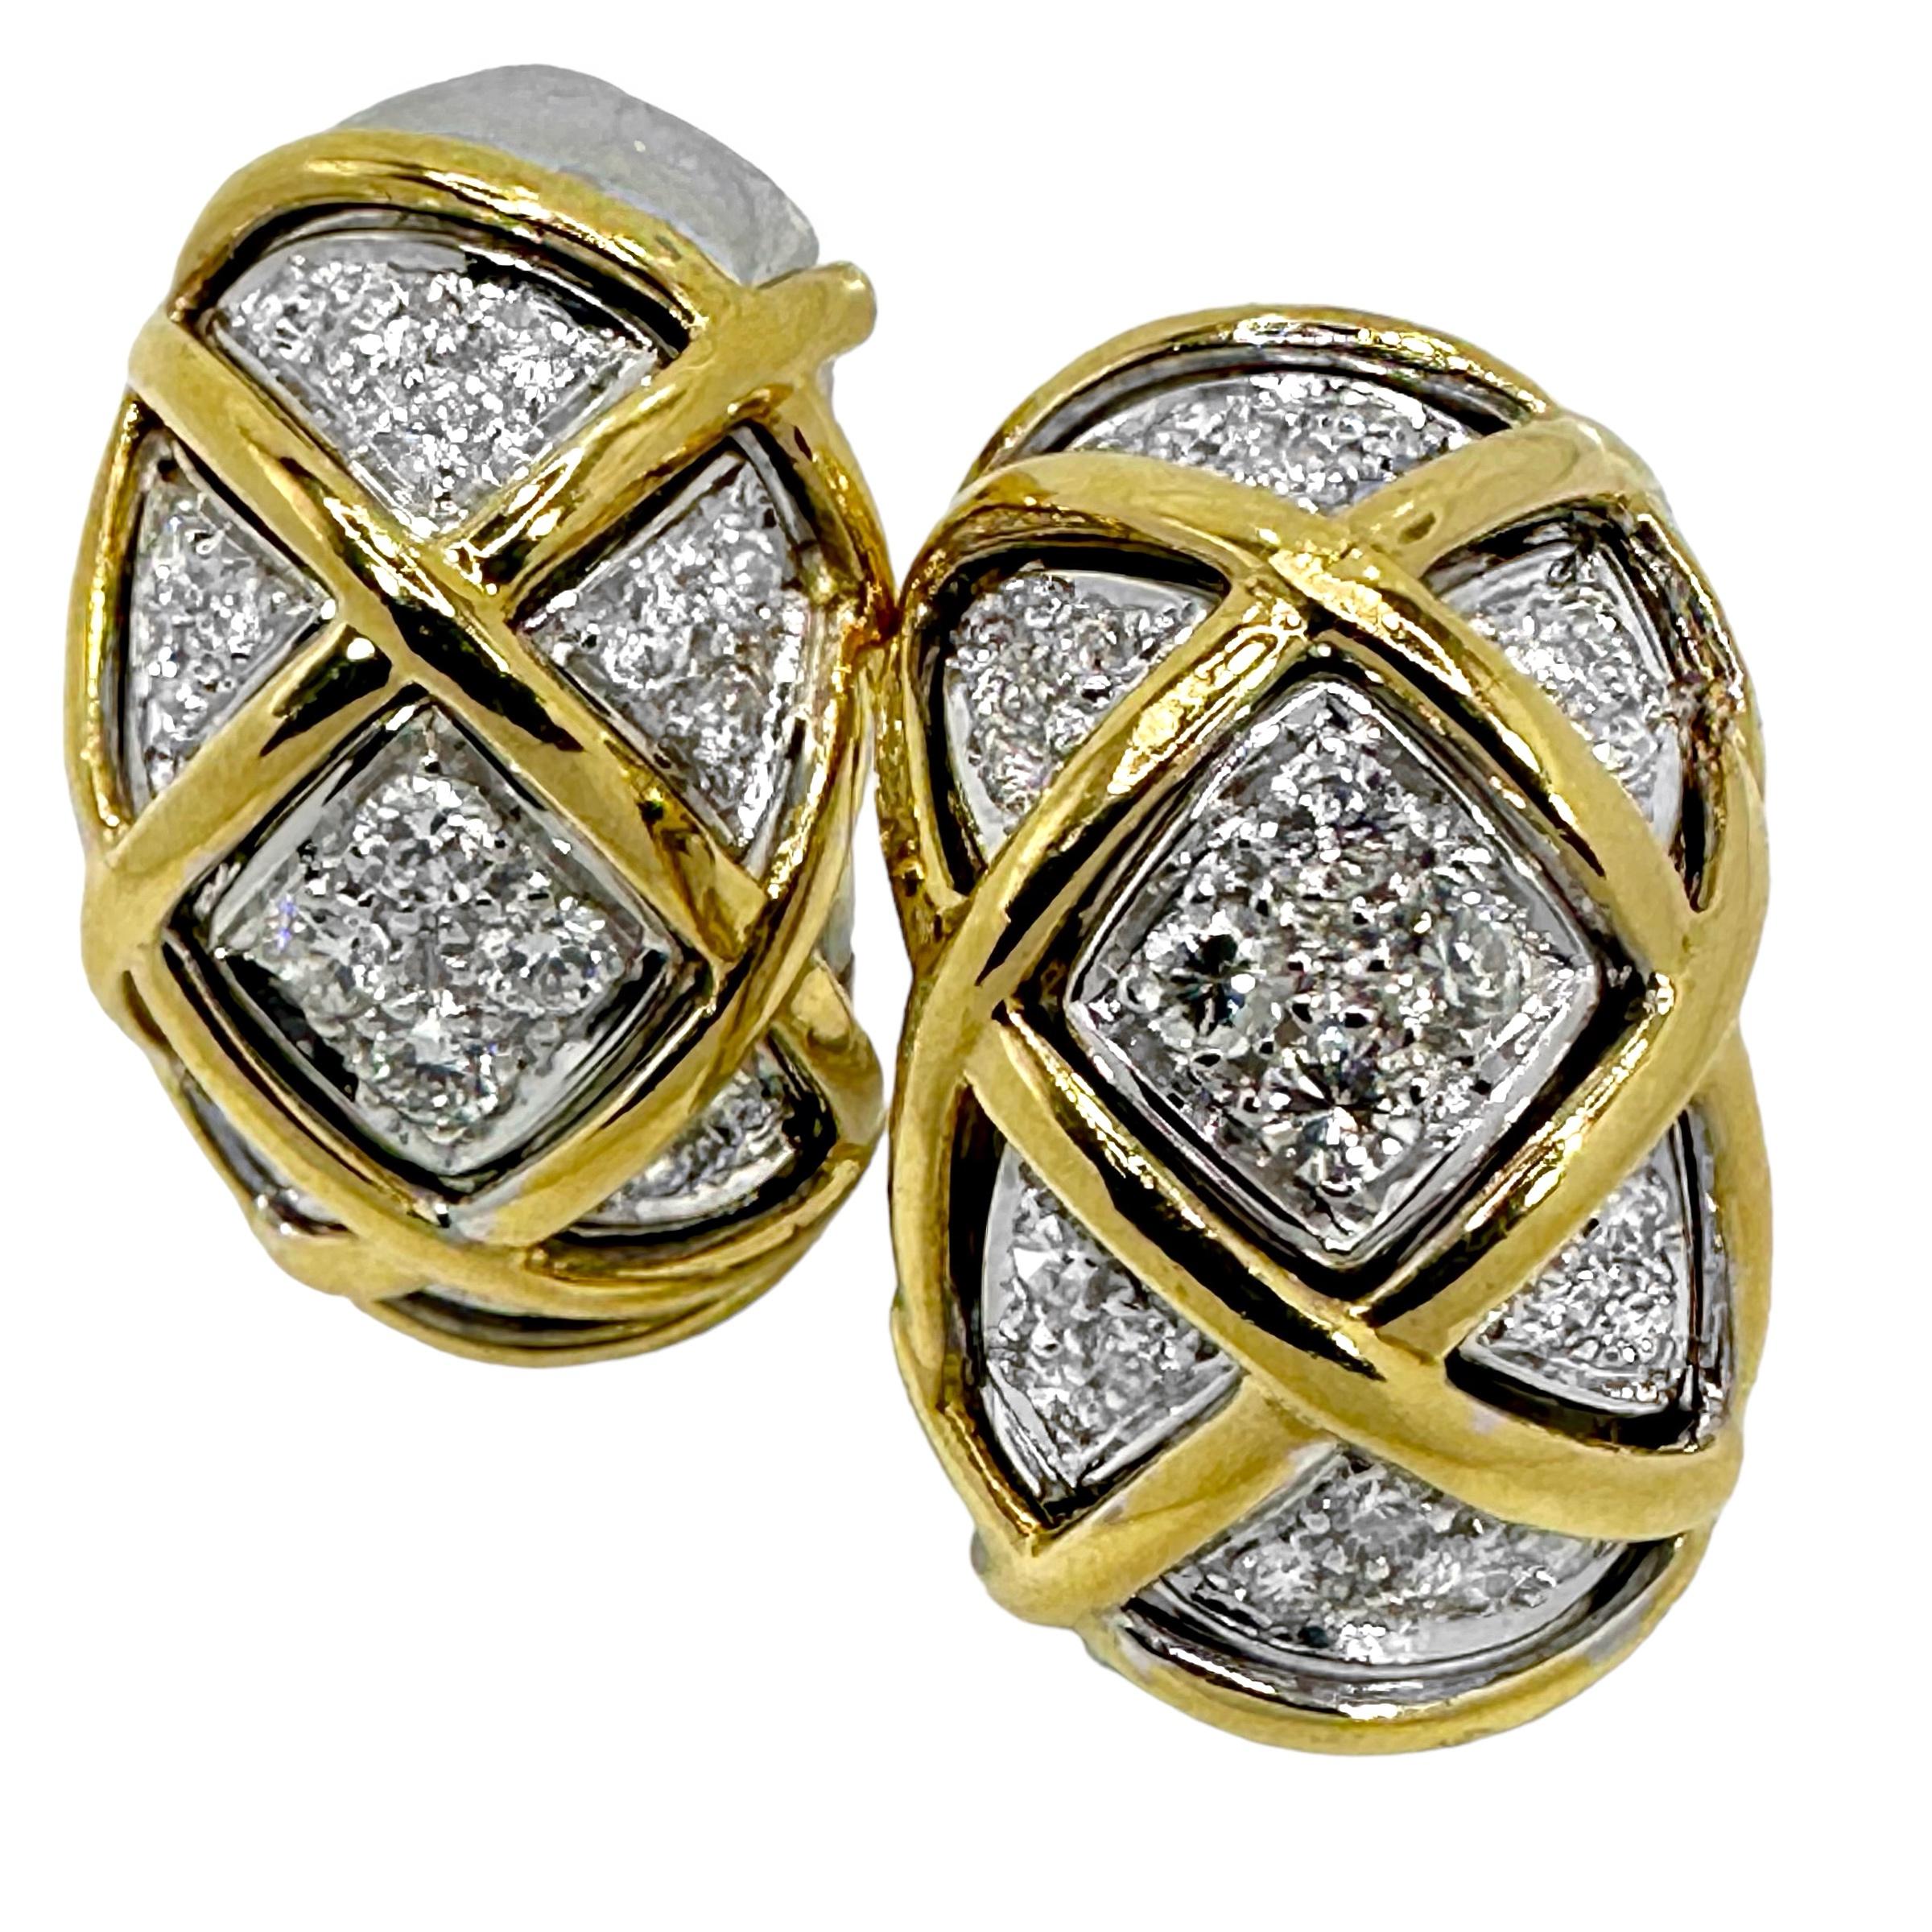 18k Yellow and White Gold Lattice Work Hoop Earrings with Diamonds by Sabbadini For Sale